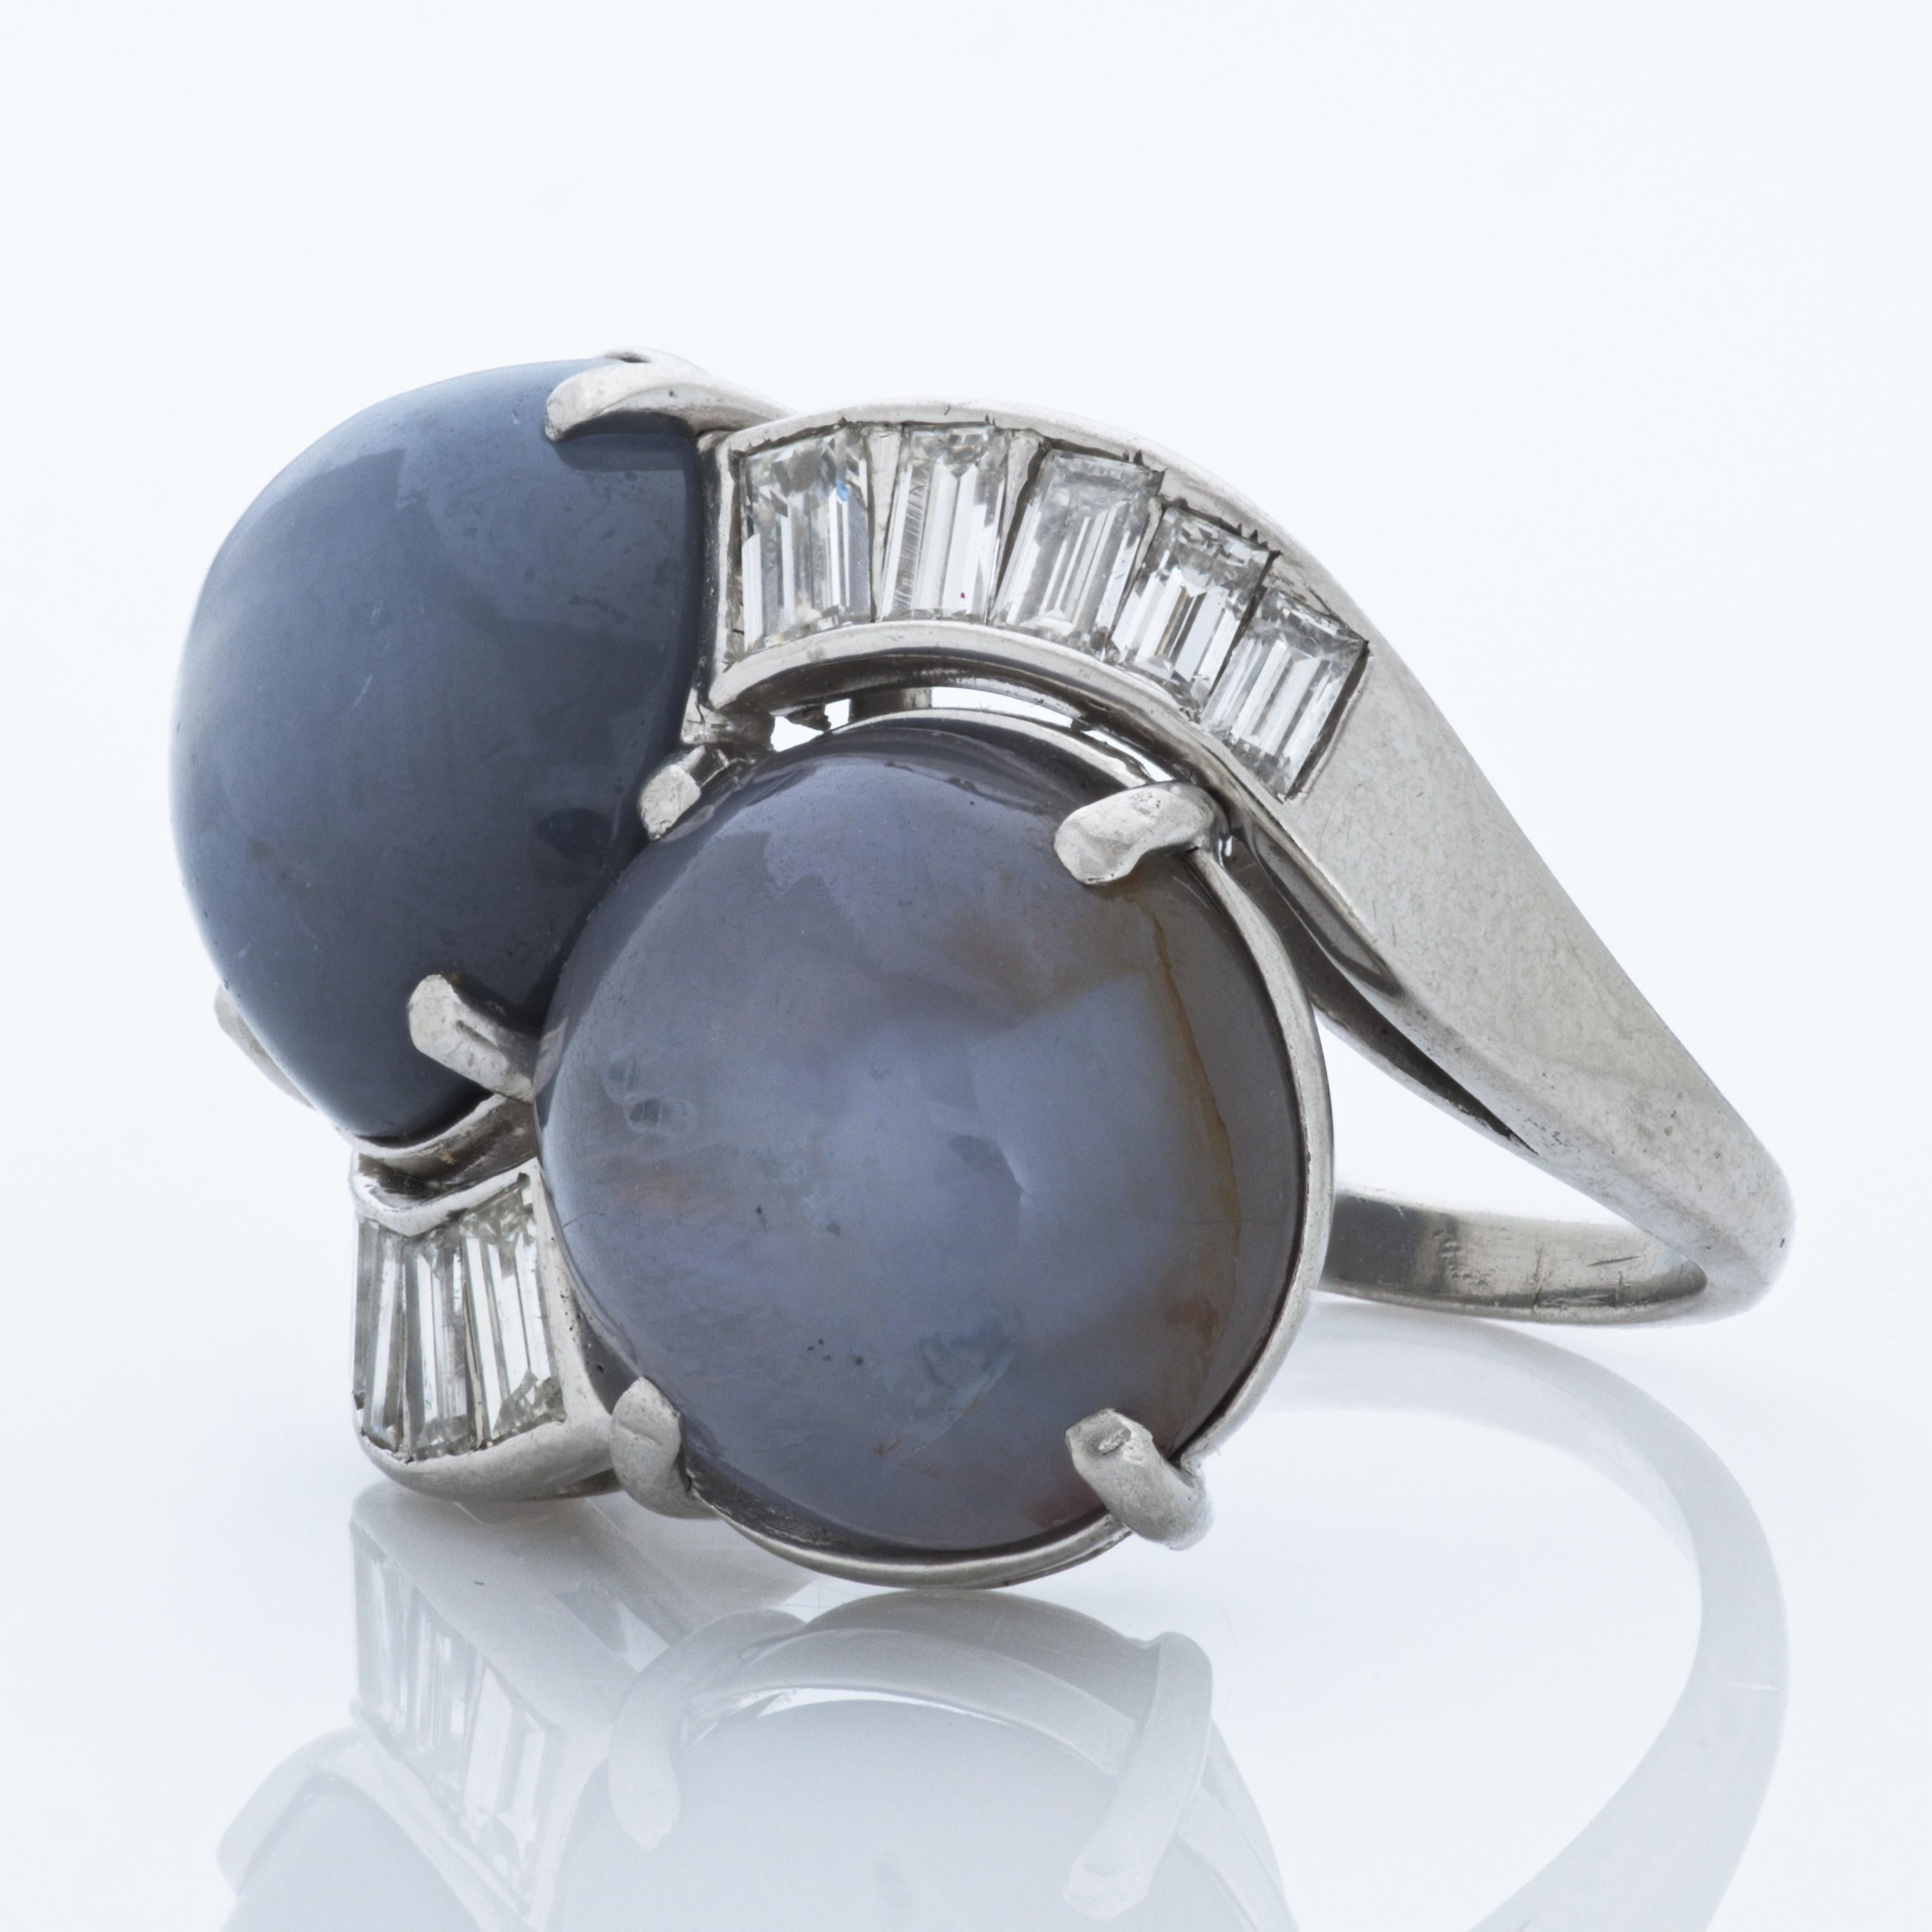 Oval cabochon star sapphire and baguette diamond twin bypass ring in platinum.

This ring features two oval cabochon star sapphires totaling approximately 27.00 carats.  These sapphires are accented by 10 baguette shape diamonds totaling